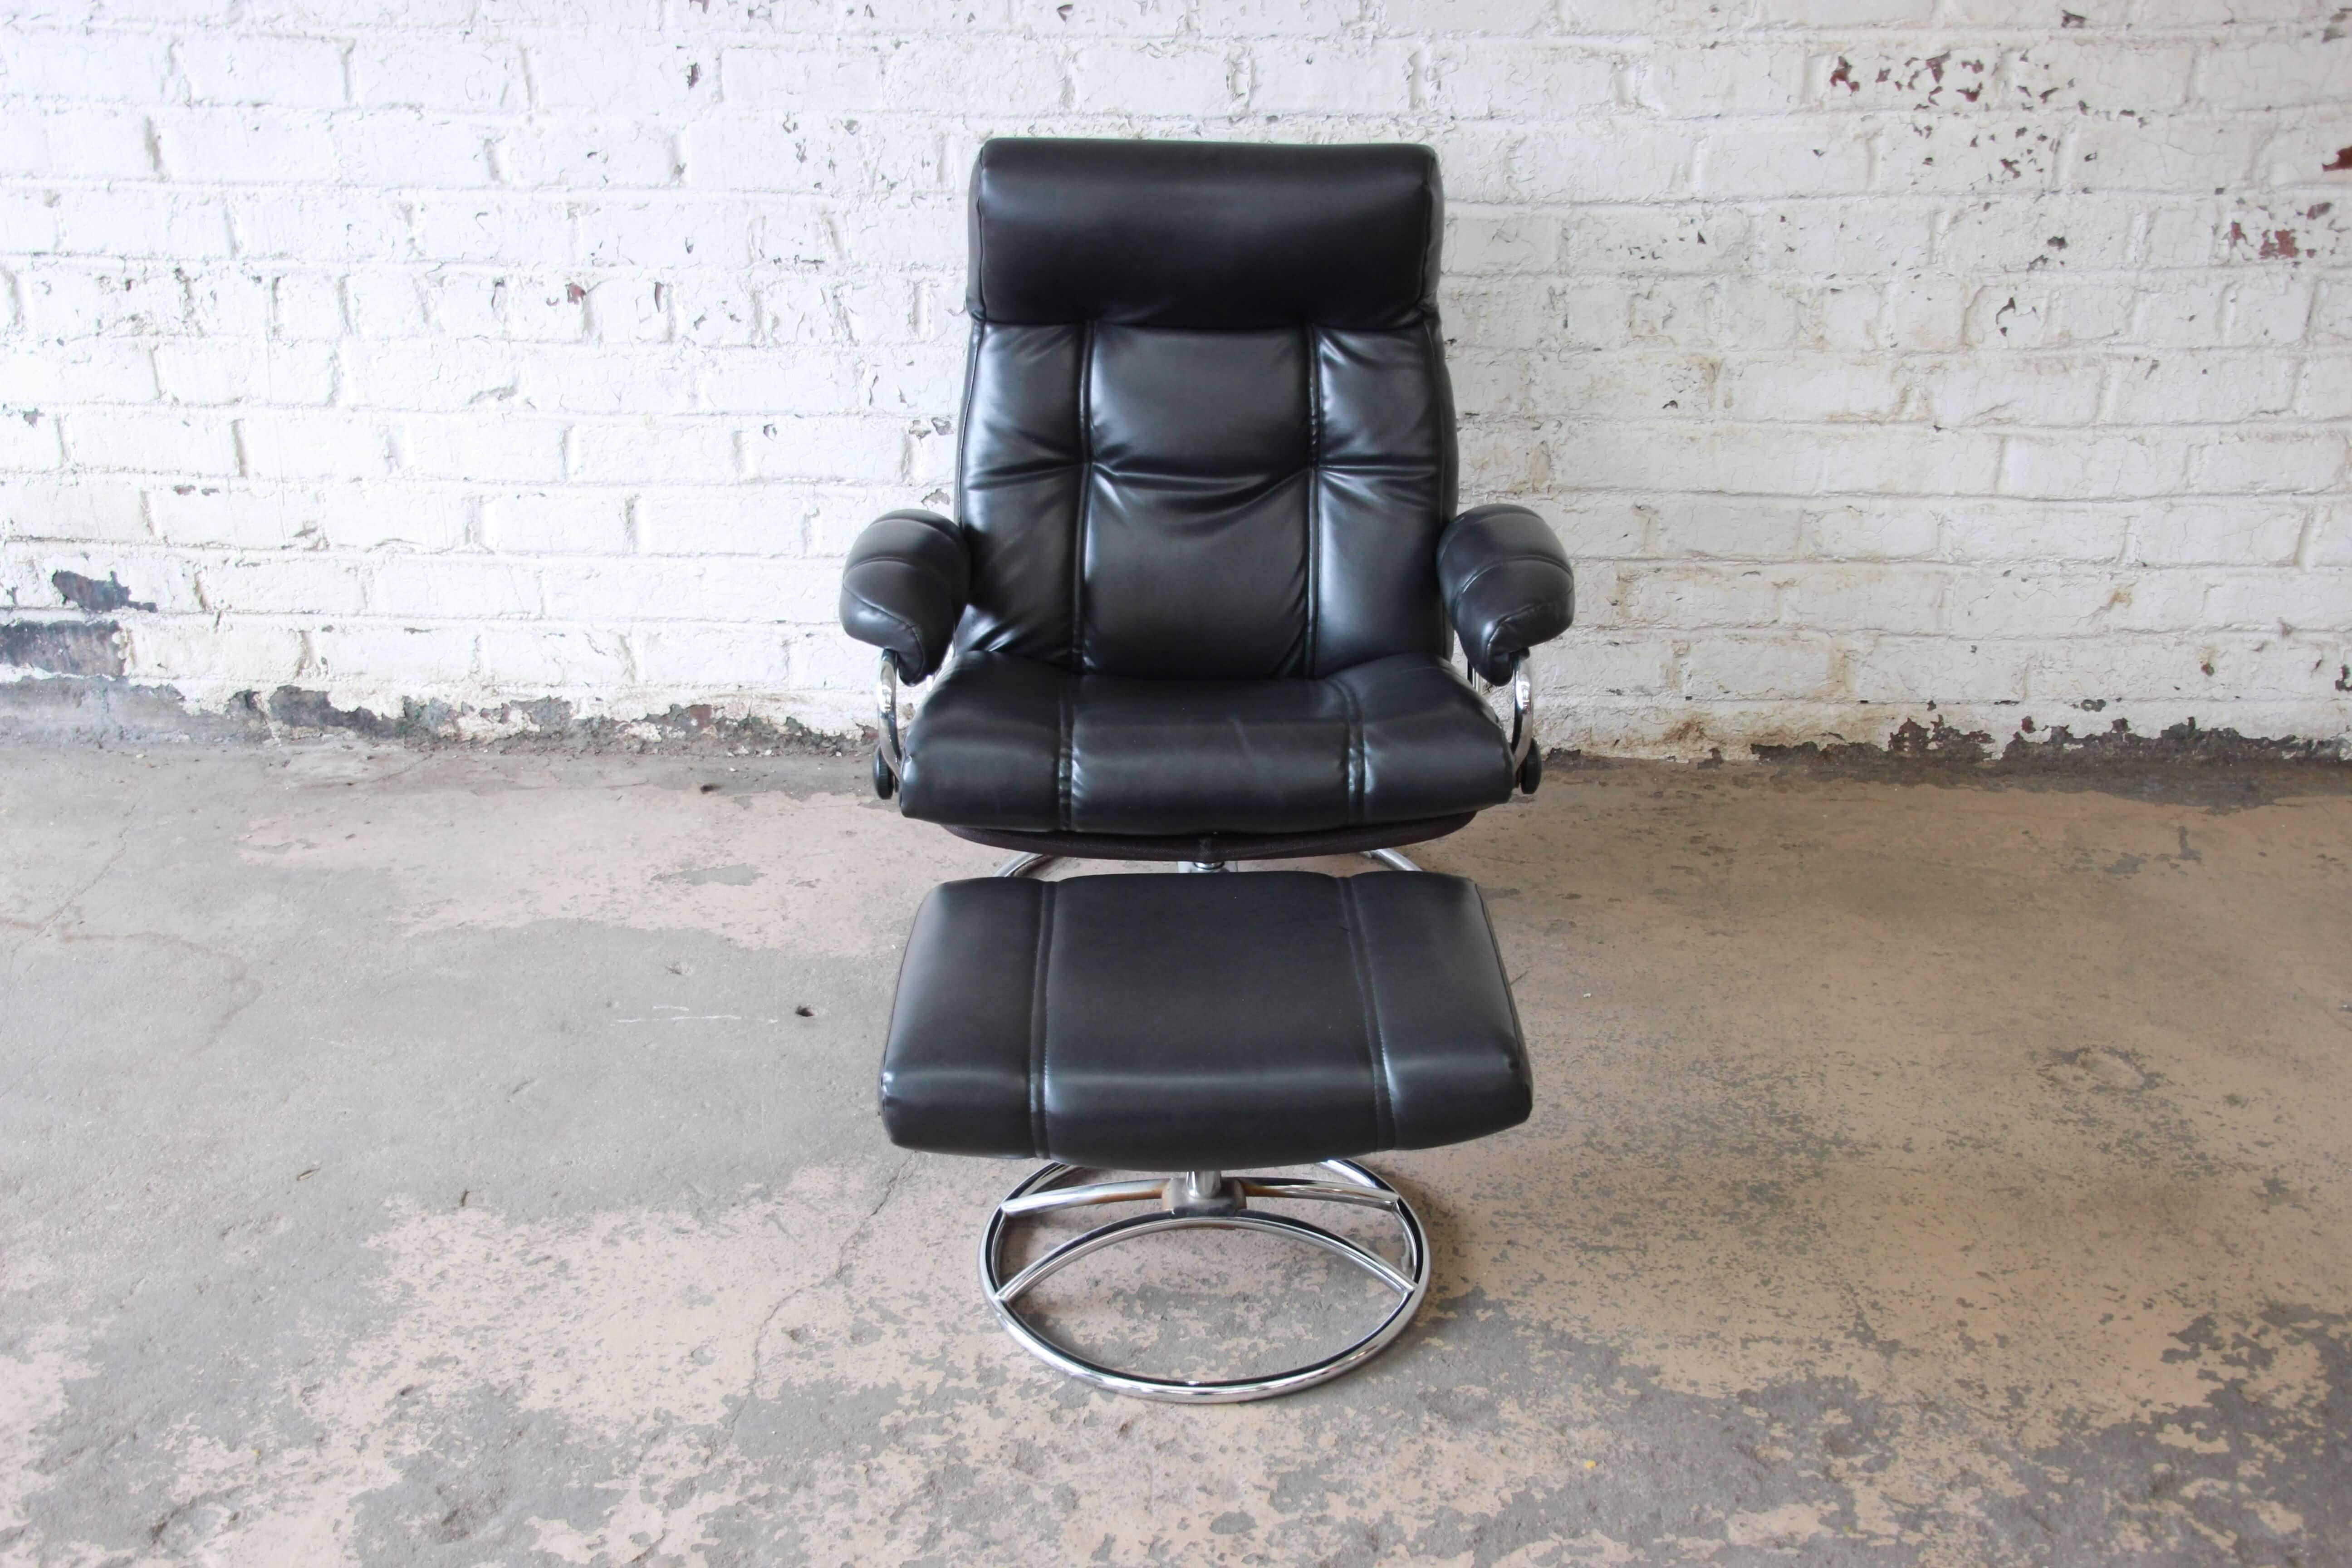 Offering a very nice vintage black upholstered Ekorness Stressless chair on ottoman. The chair sits comfortably with a nice ottoman. The chair smoothly reclines while easily adjusting to your position for comfort. The upholstery is in good vintage